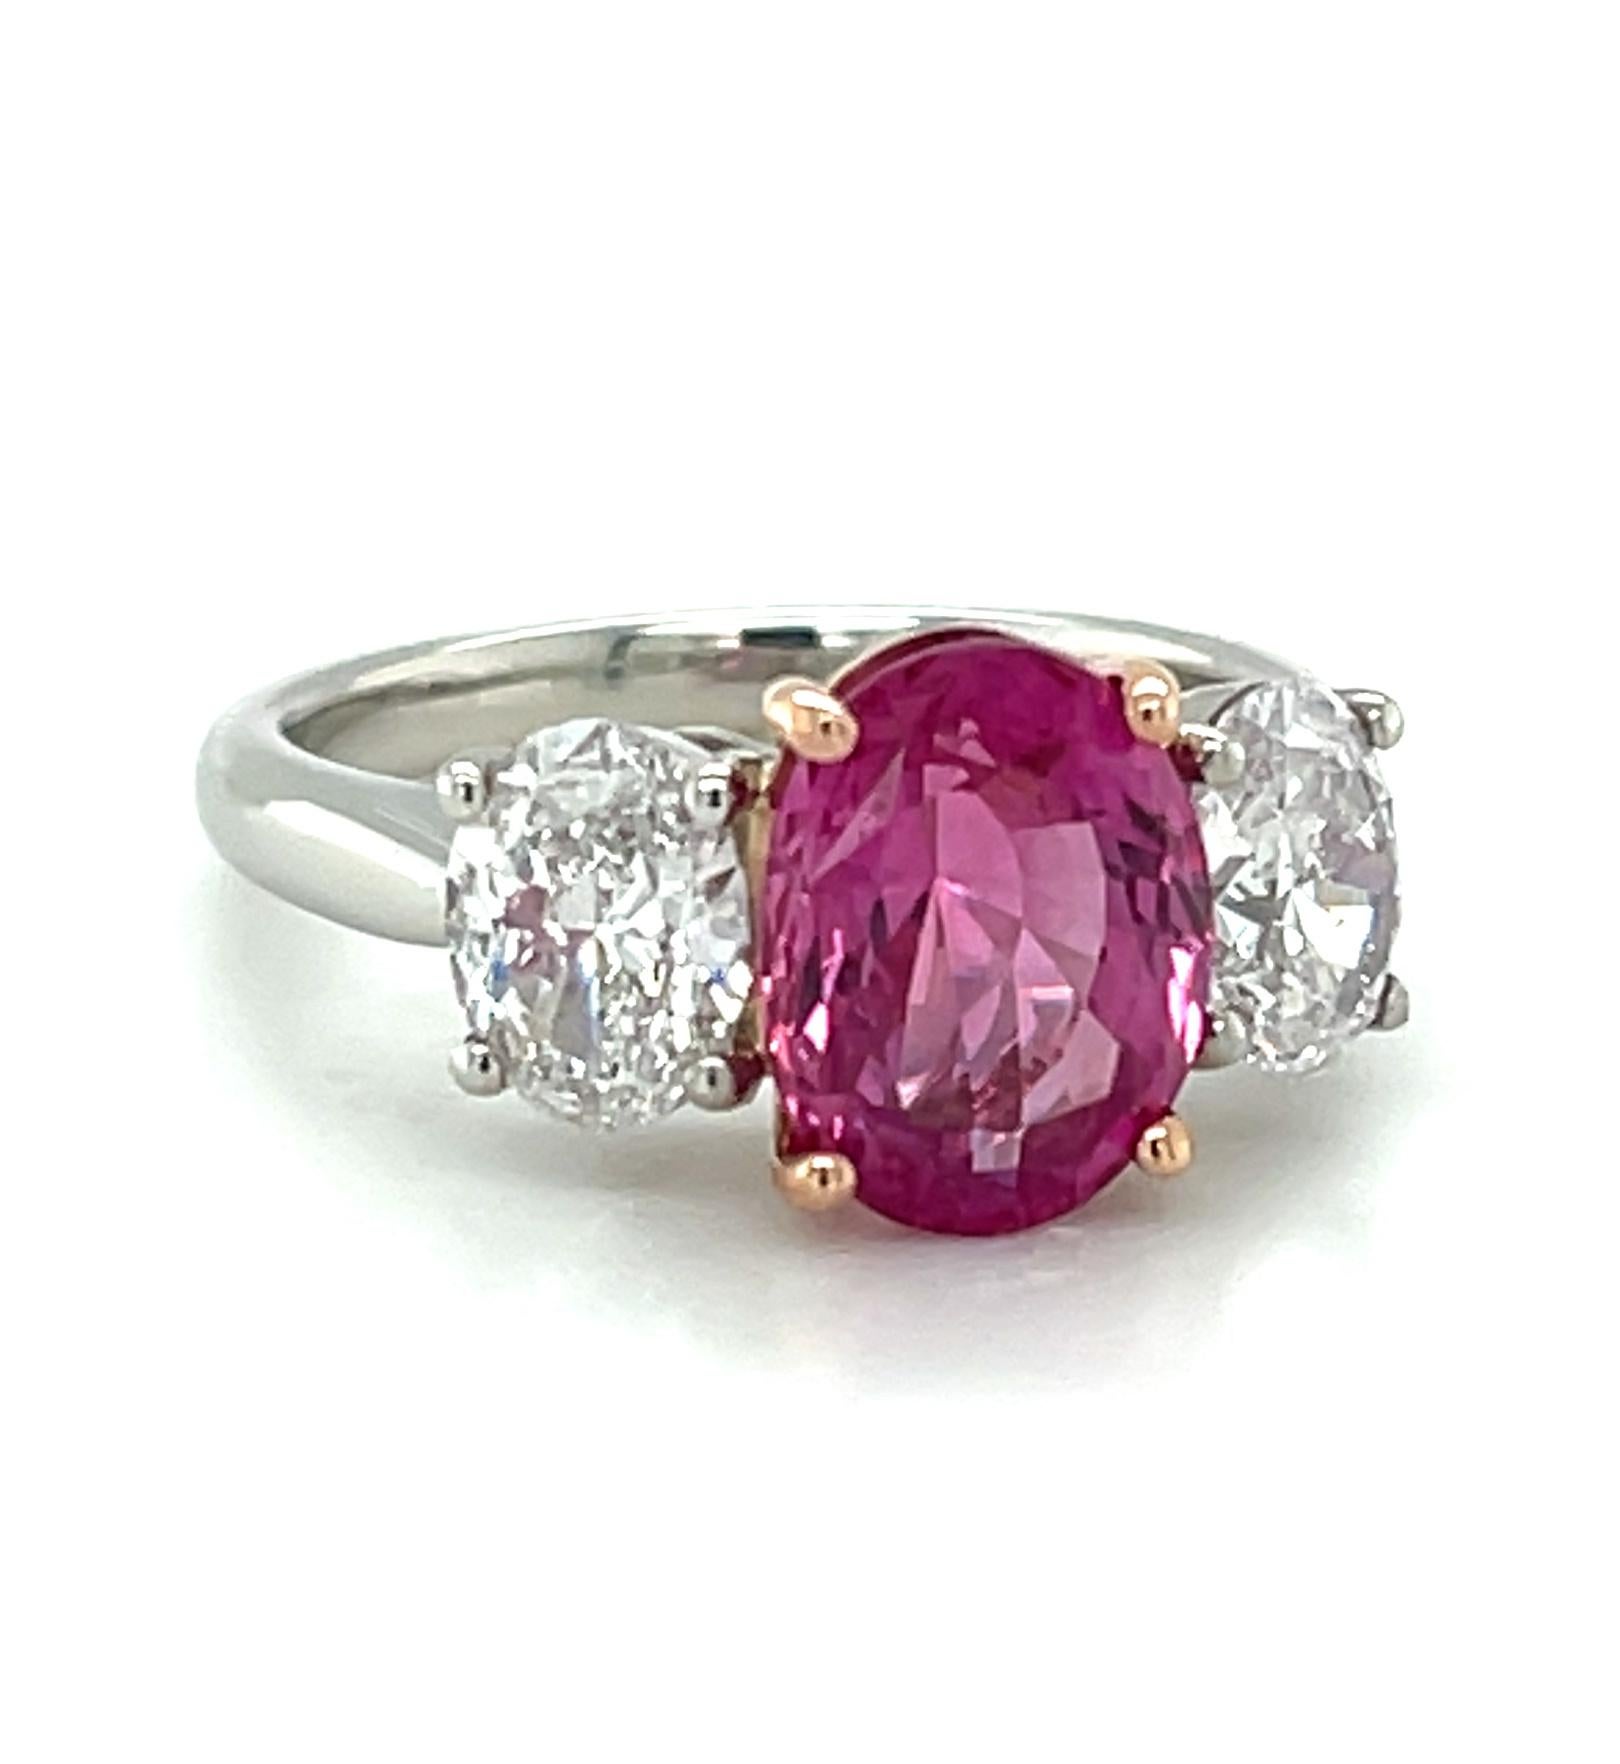 Oval Cut Pink Sapphire Engagement Ring, 3.13 Carats with Oval Diamonds, GIA Certified For Sale